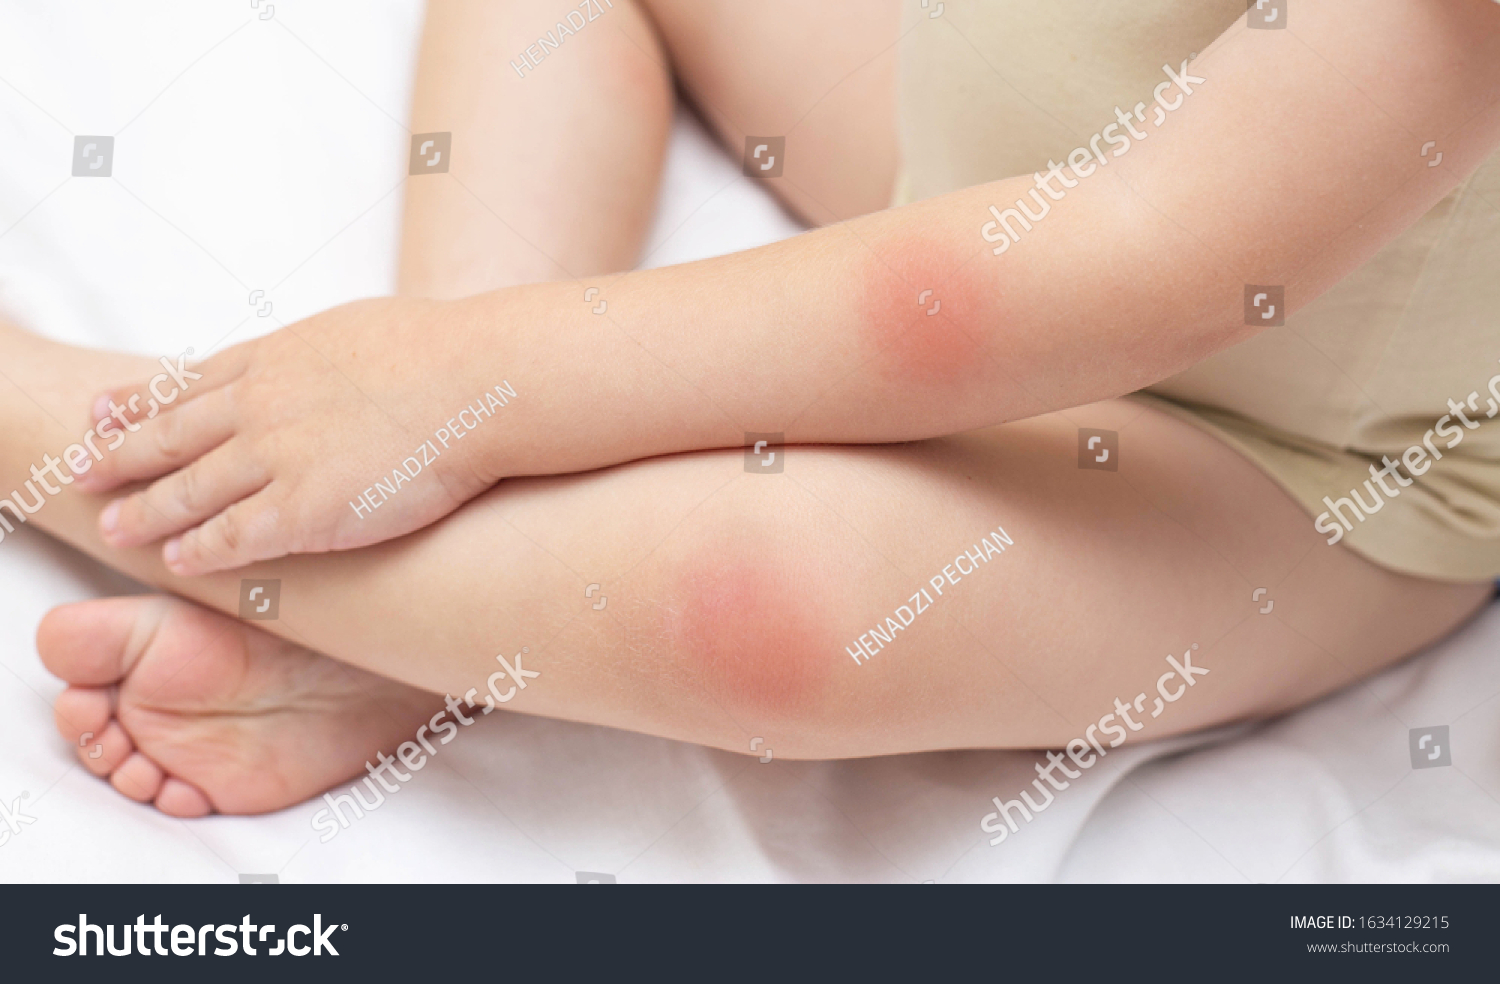 Hands and feet of a young child who has a rash and redness on the skin. The concept of treatment of diseases and skin care in children, background. Dermatology #1634129215